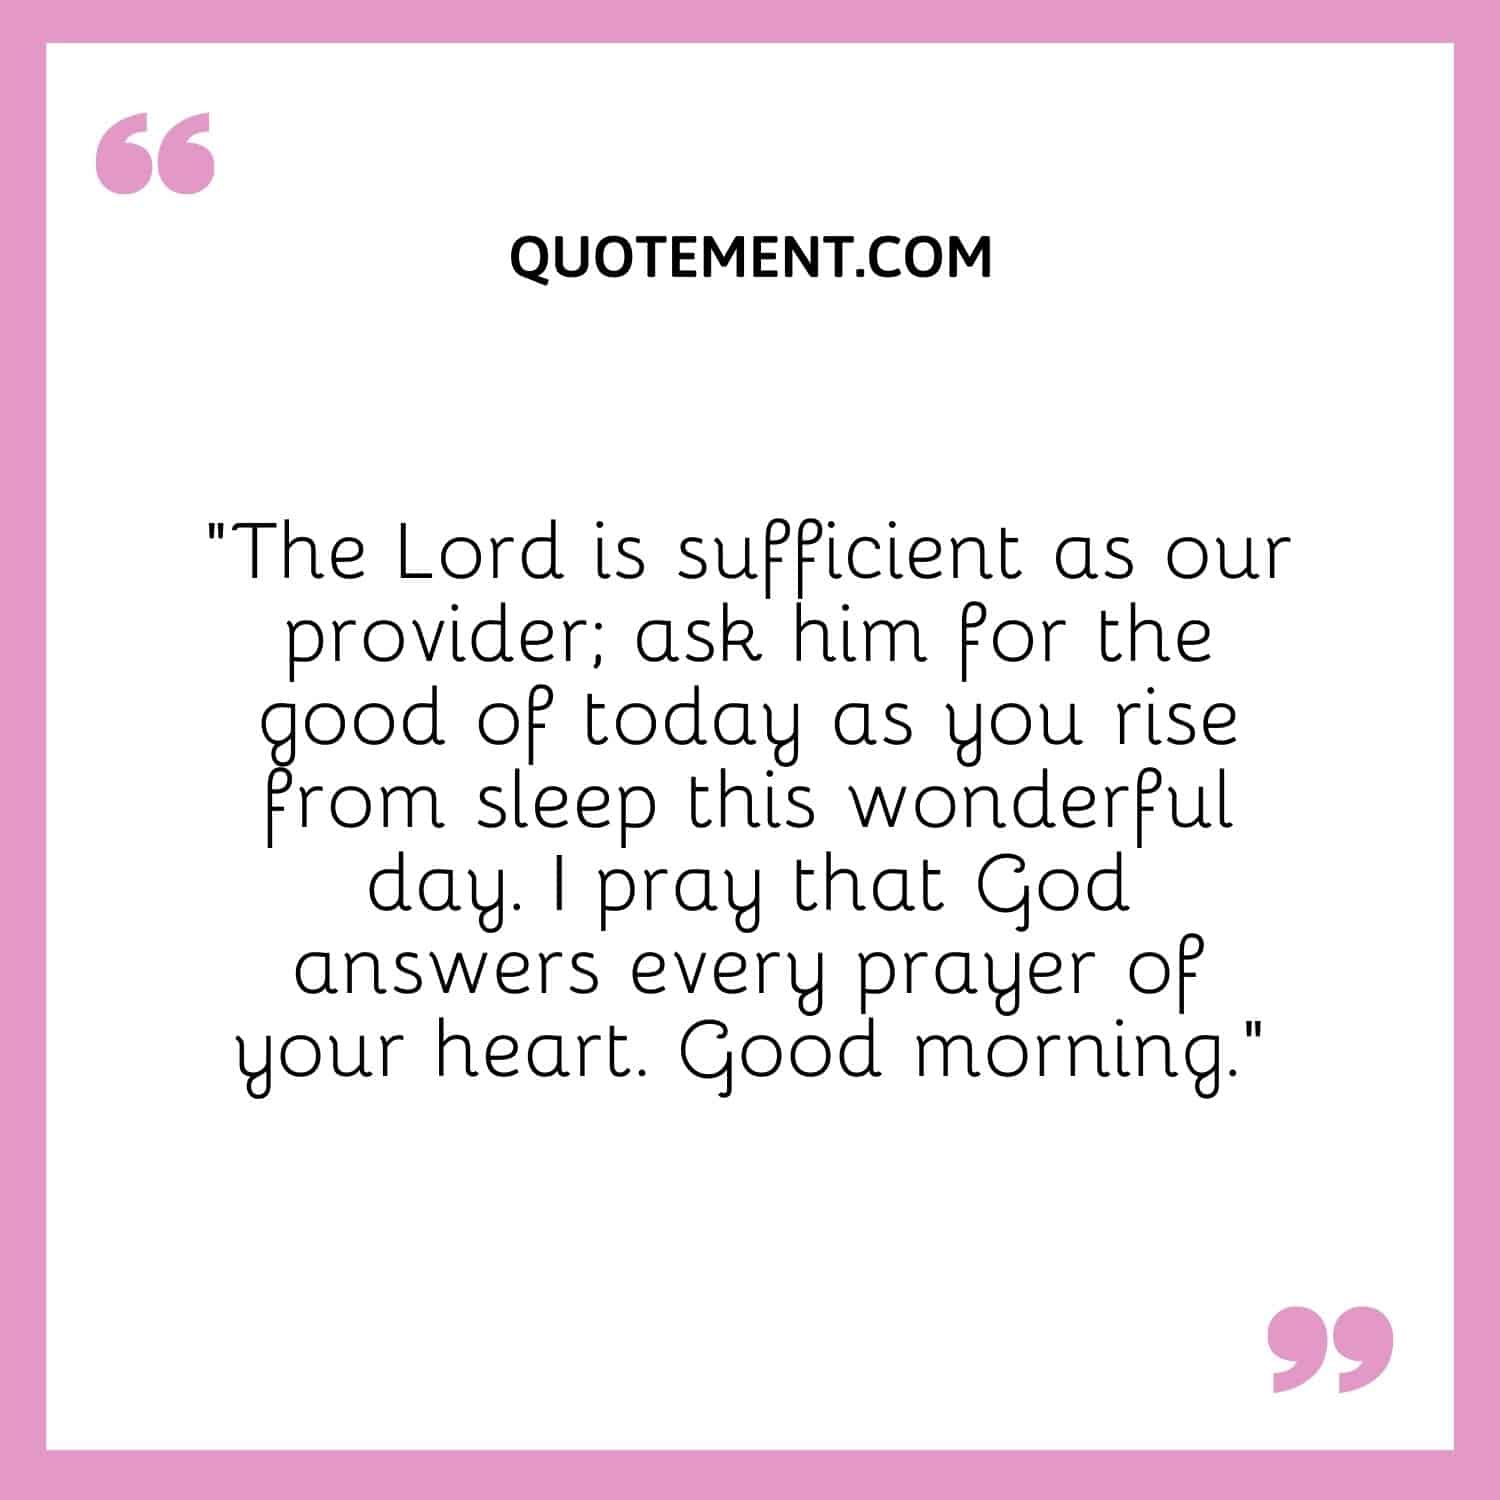 The Lord is sufficient as our provider